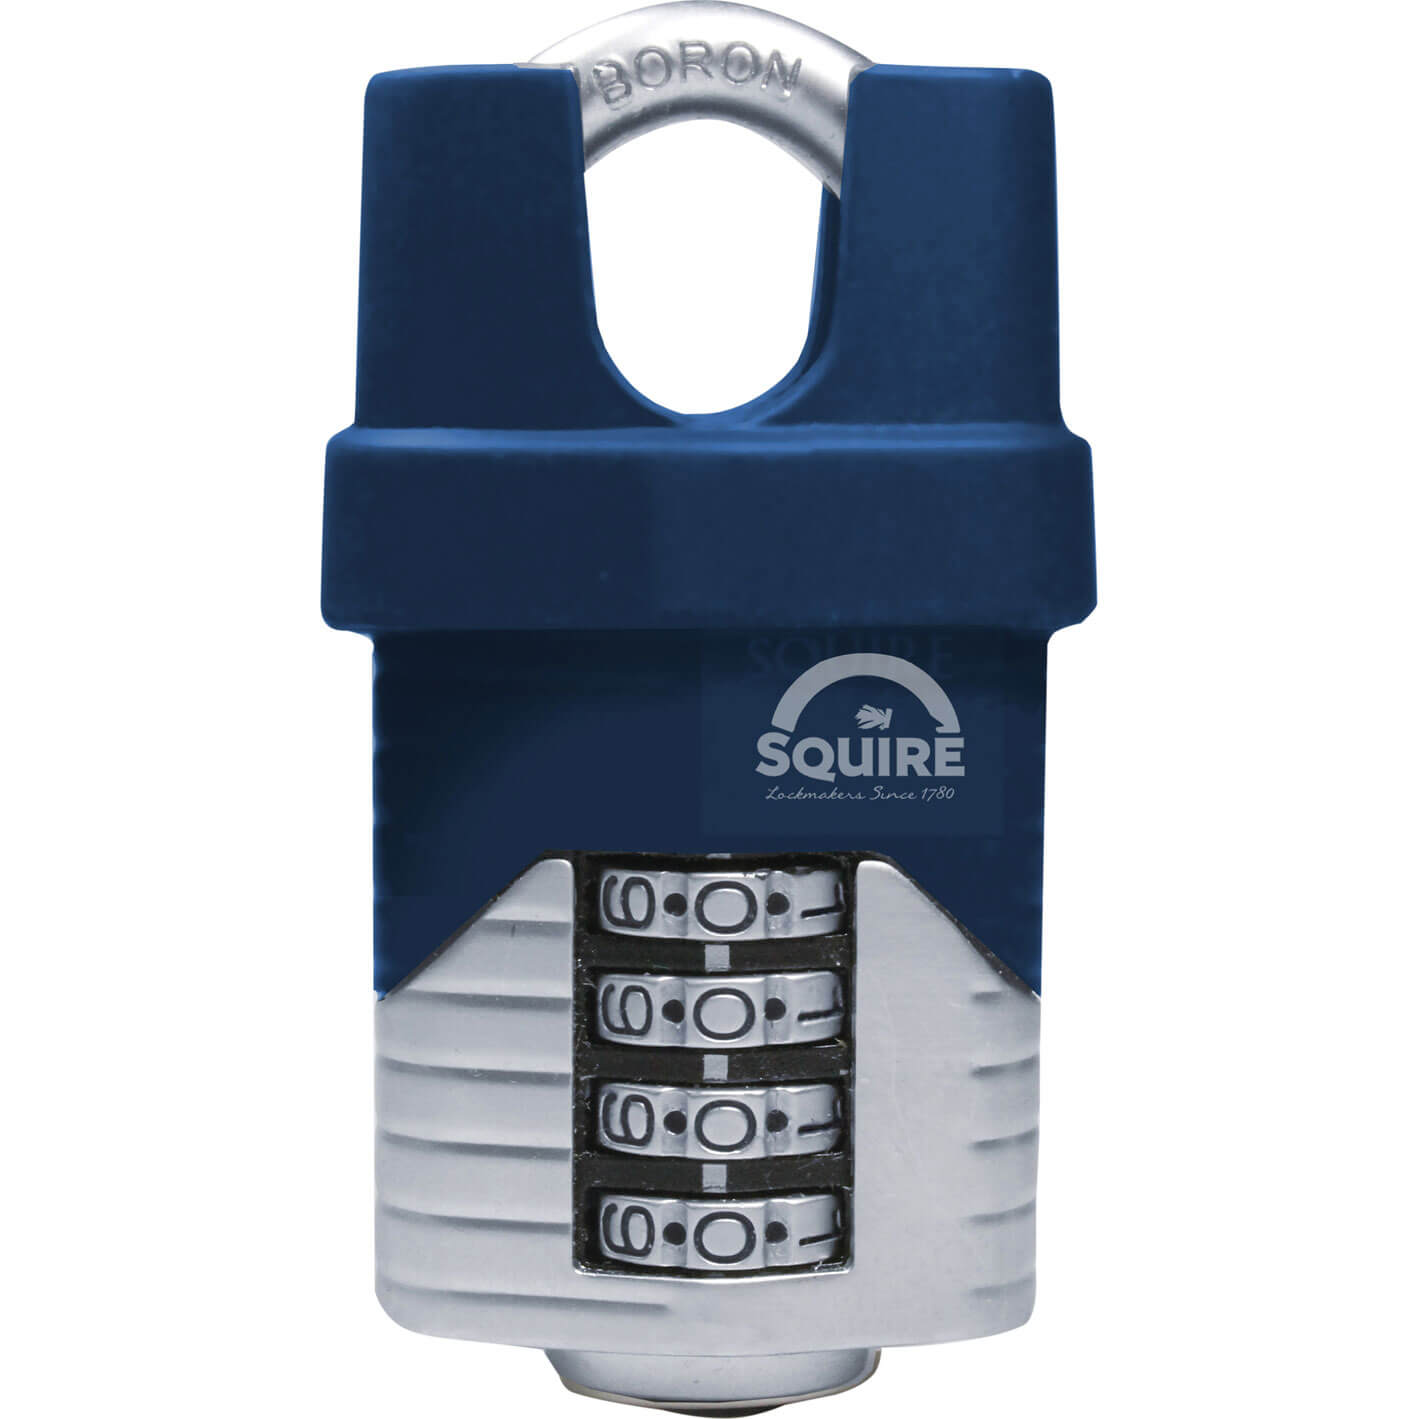 Image of Henry Squire Vulcan Boron Shackle Combination Padlock 40mm Closed